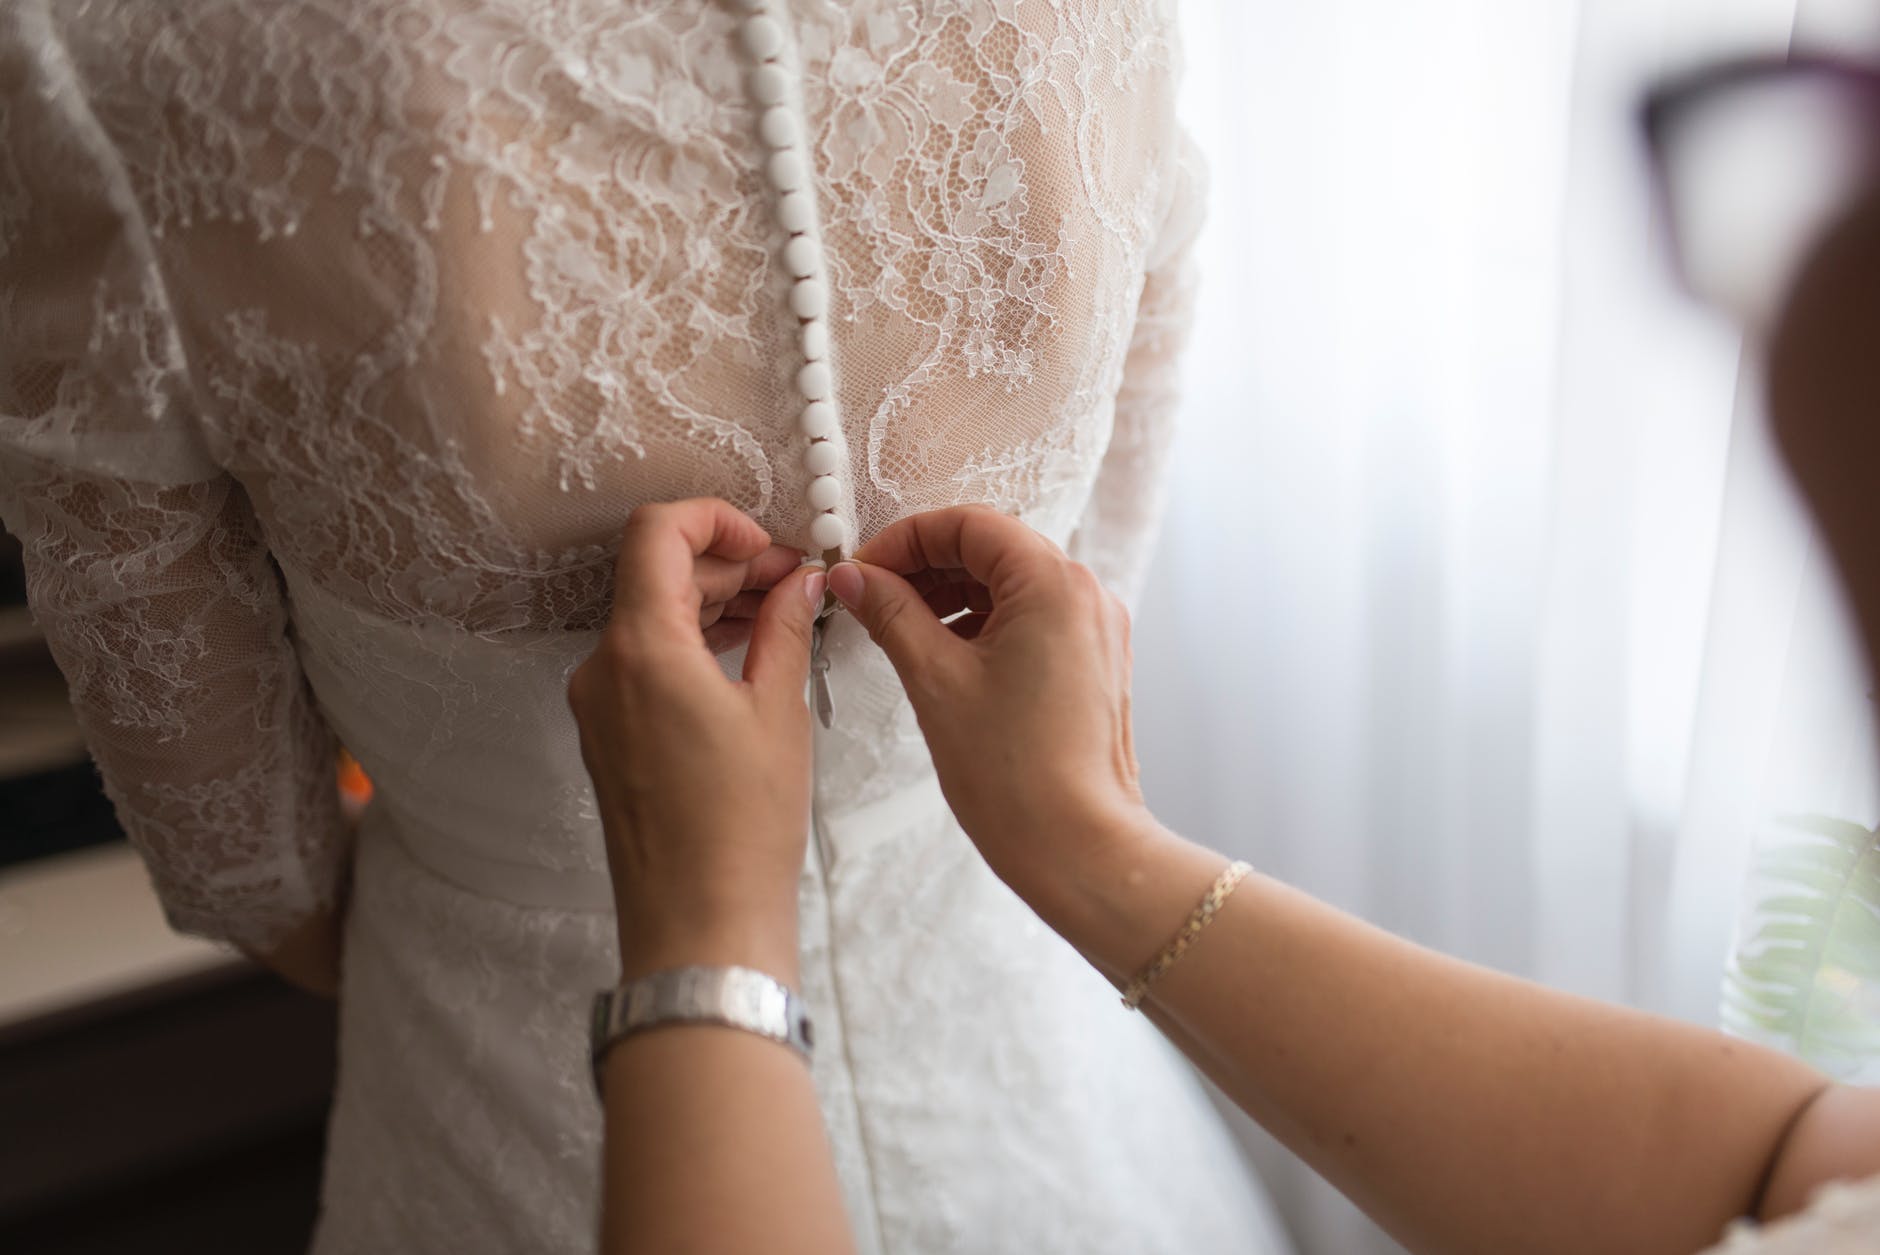 Miriam gave her a surprise before the wedding. | Source: Pexels